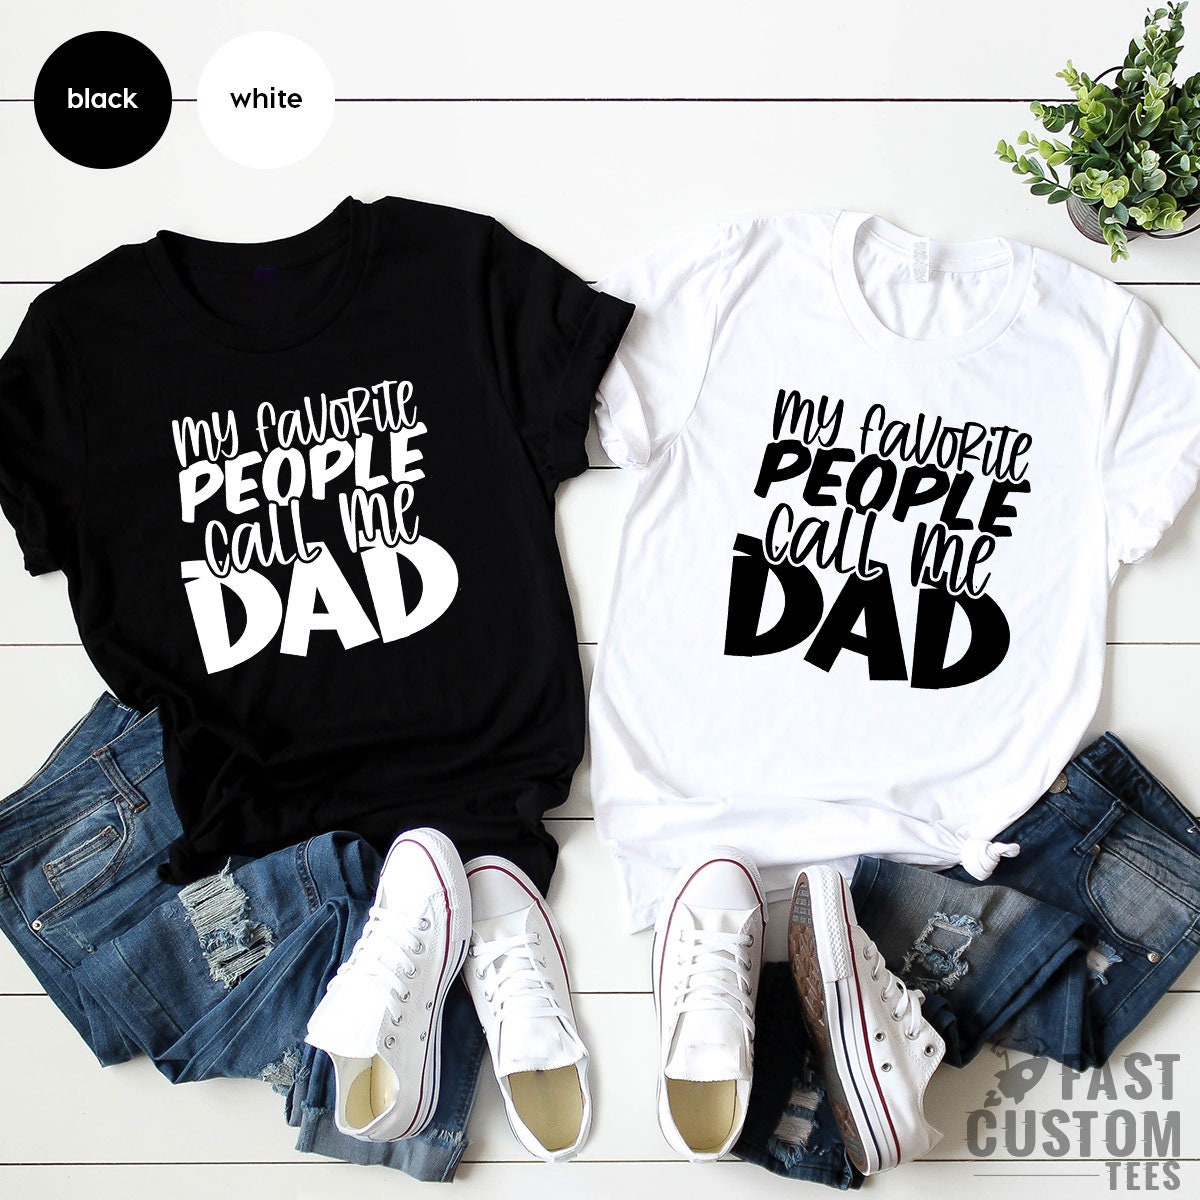 Favorite Dad Shirt, Fathers Day Gift, Fathers Day Shirt, Dad Gifts, Gifts For Dad, Dad Birthday Gift, Dad To Be Shirt, Dad Shirt - Fastdeliverytees.com